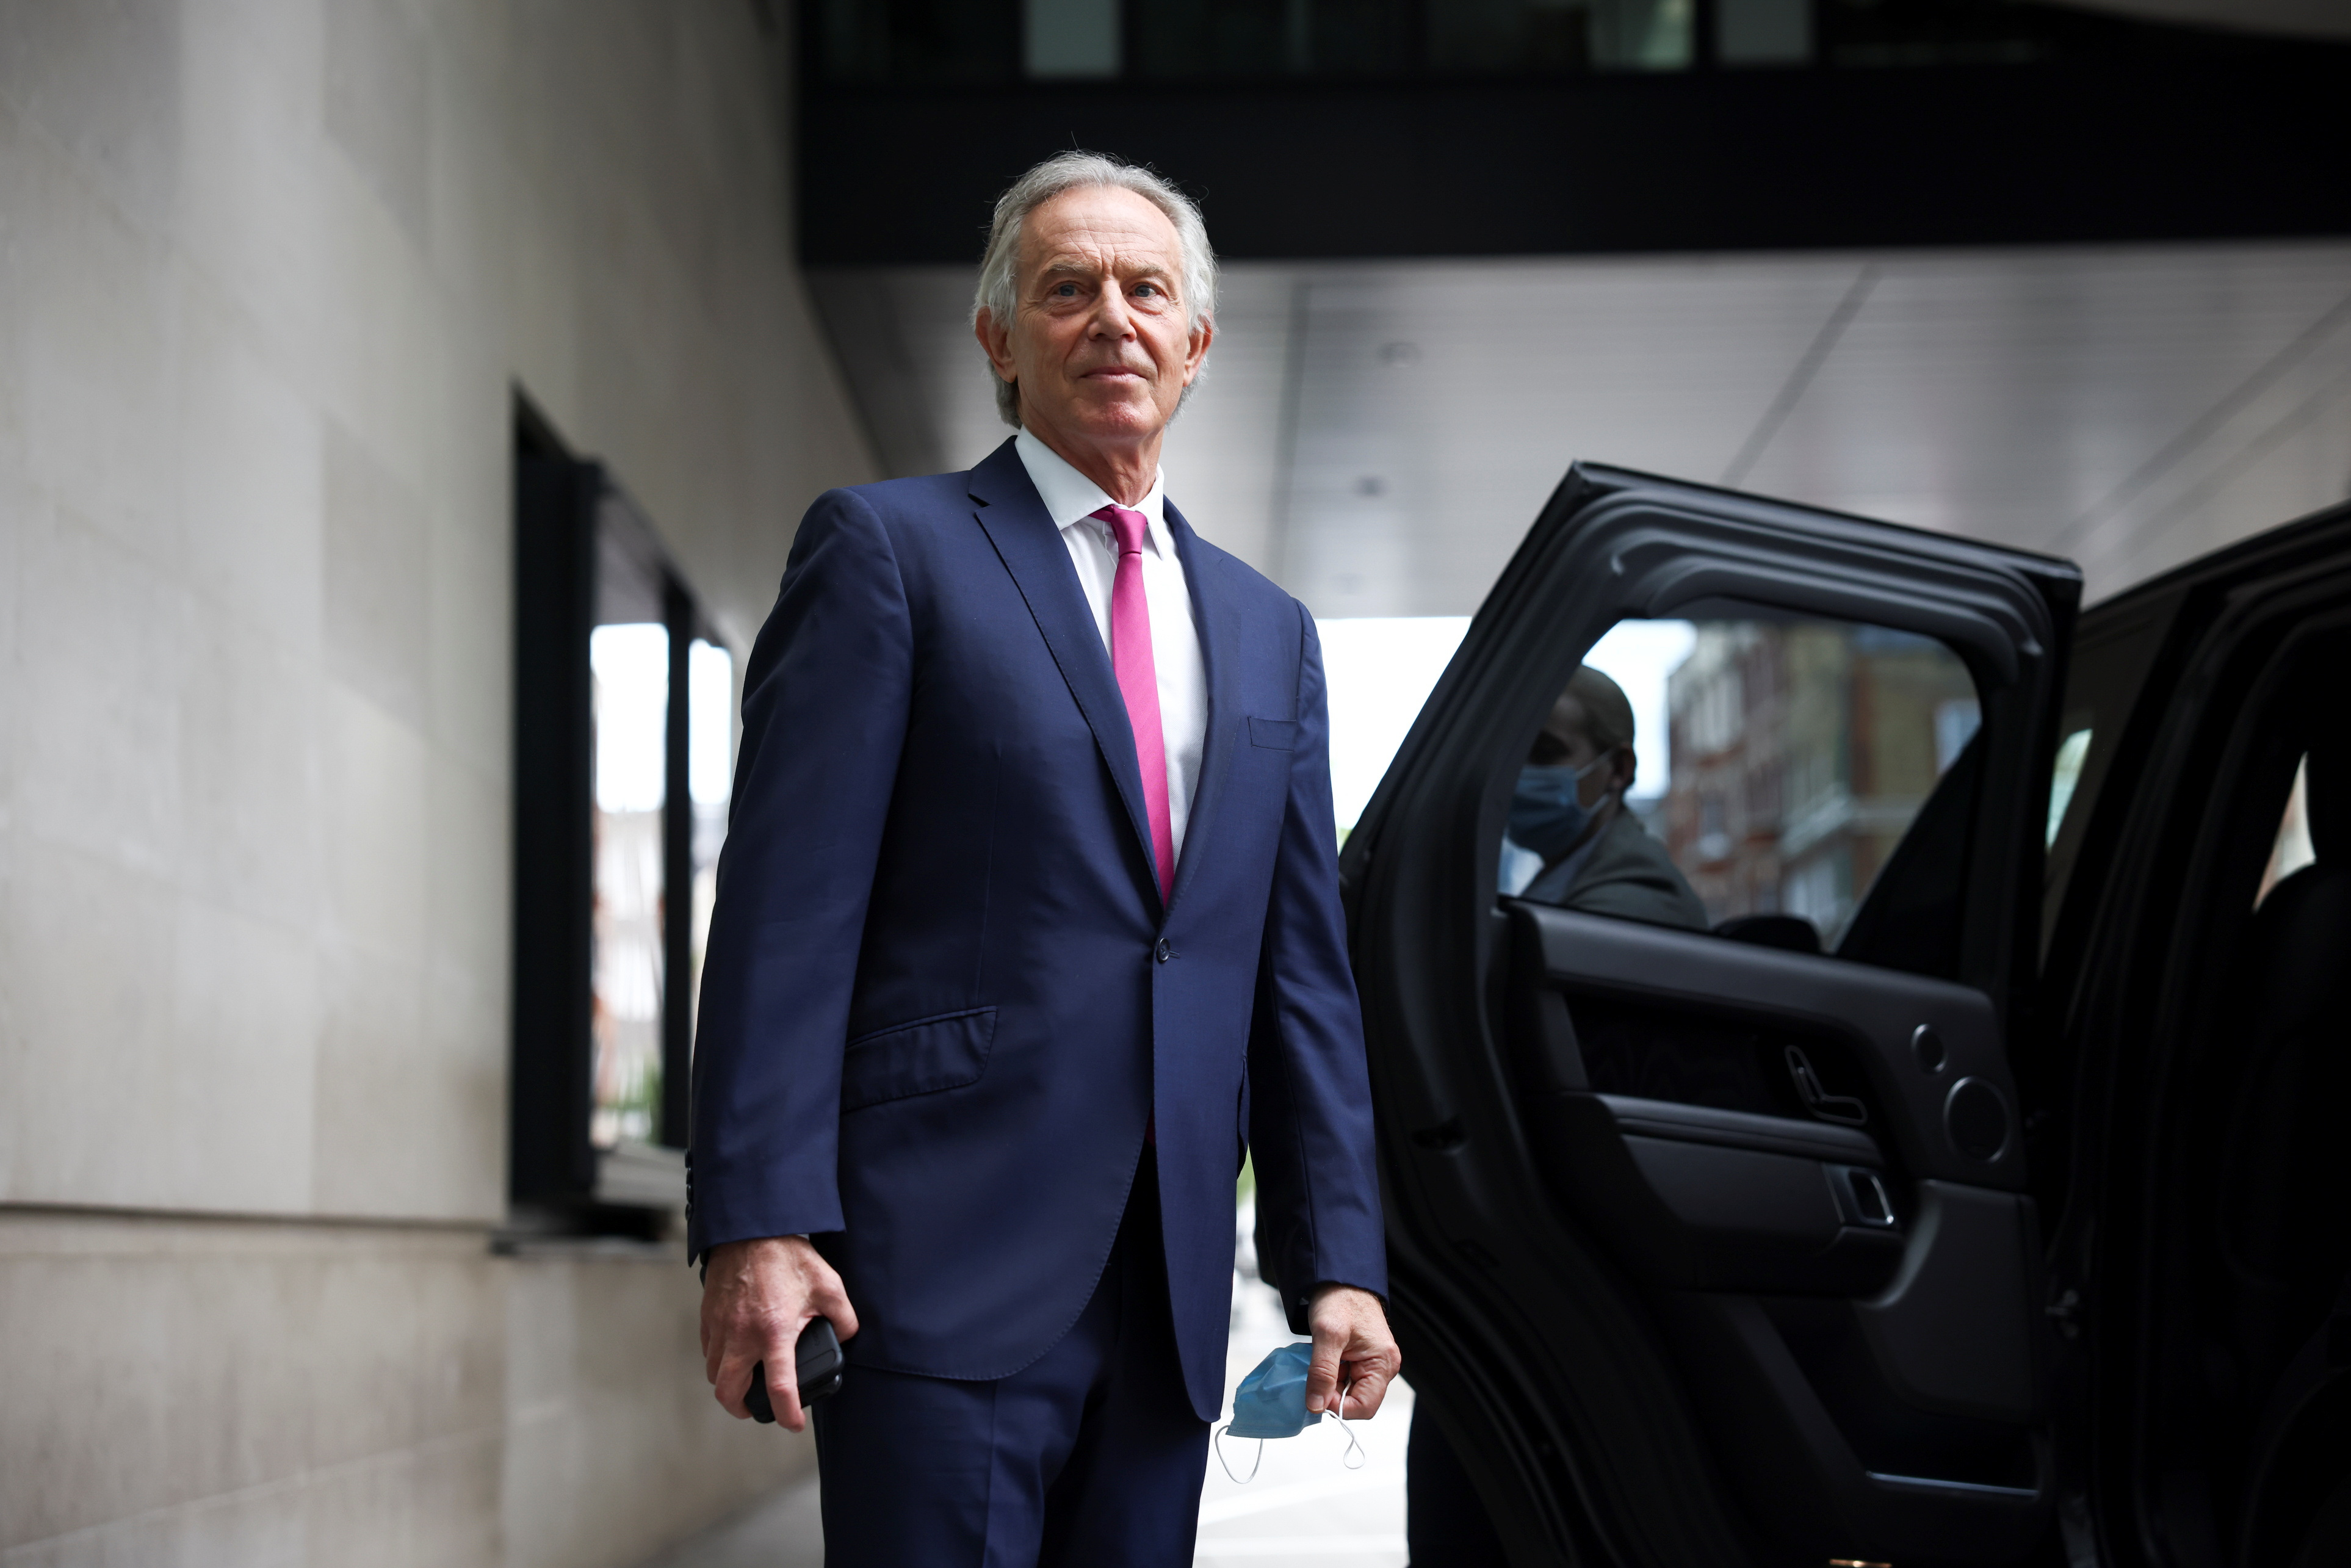 Former British Prime Minister Tony Blair leaves the BBC Headquarters after appearing on the Andrew Marr Show, in London